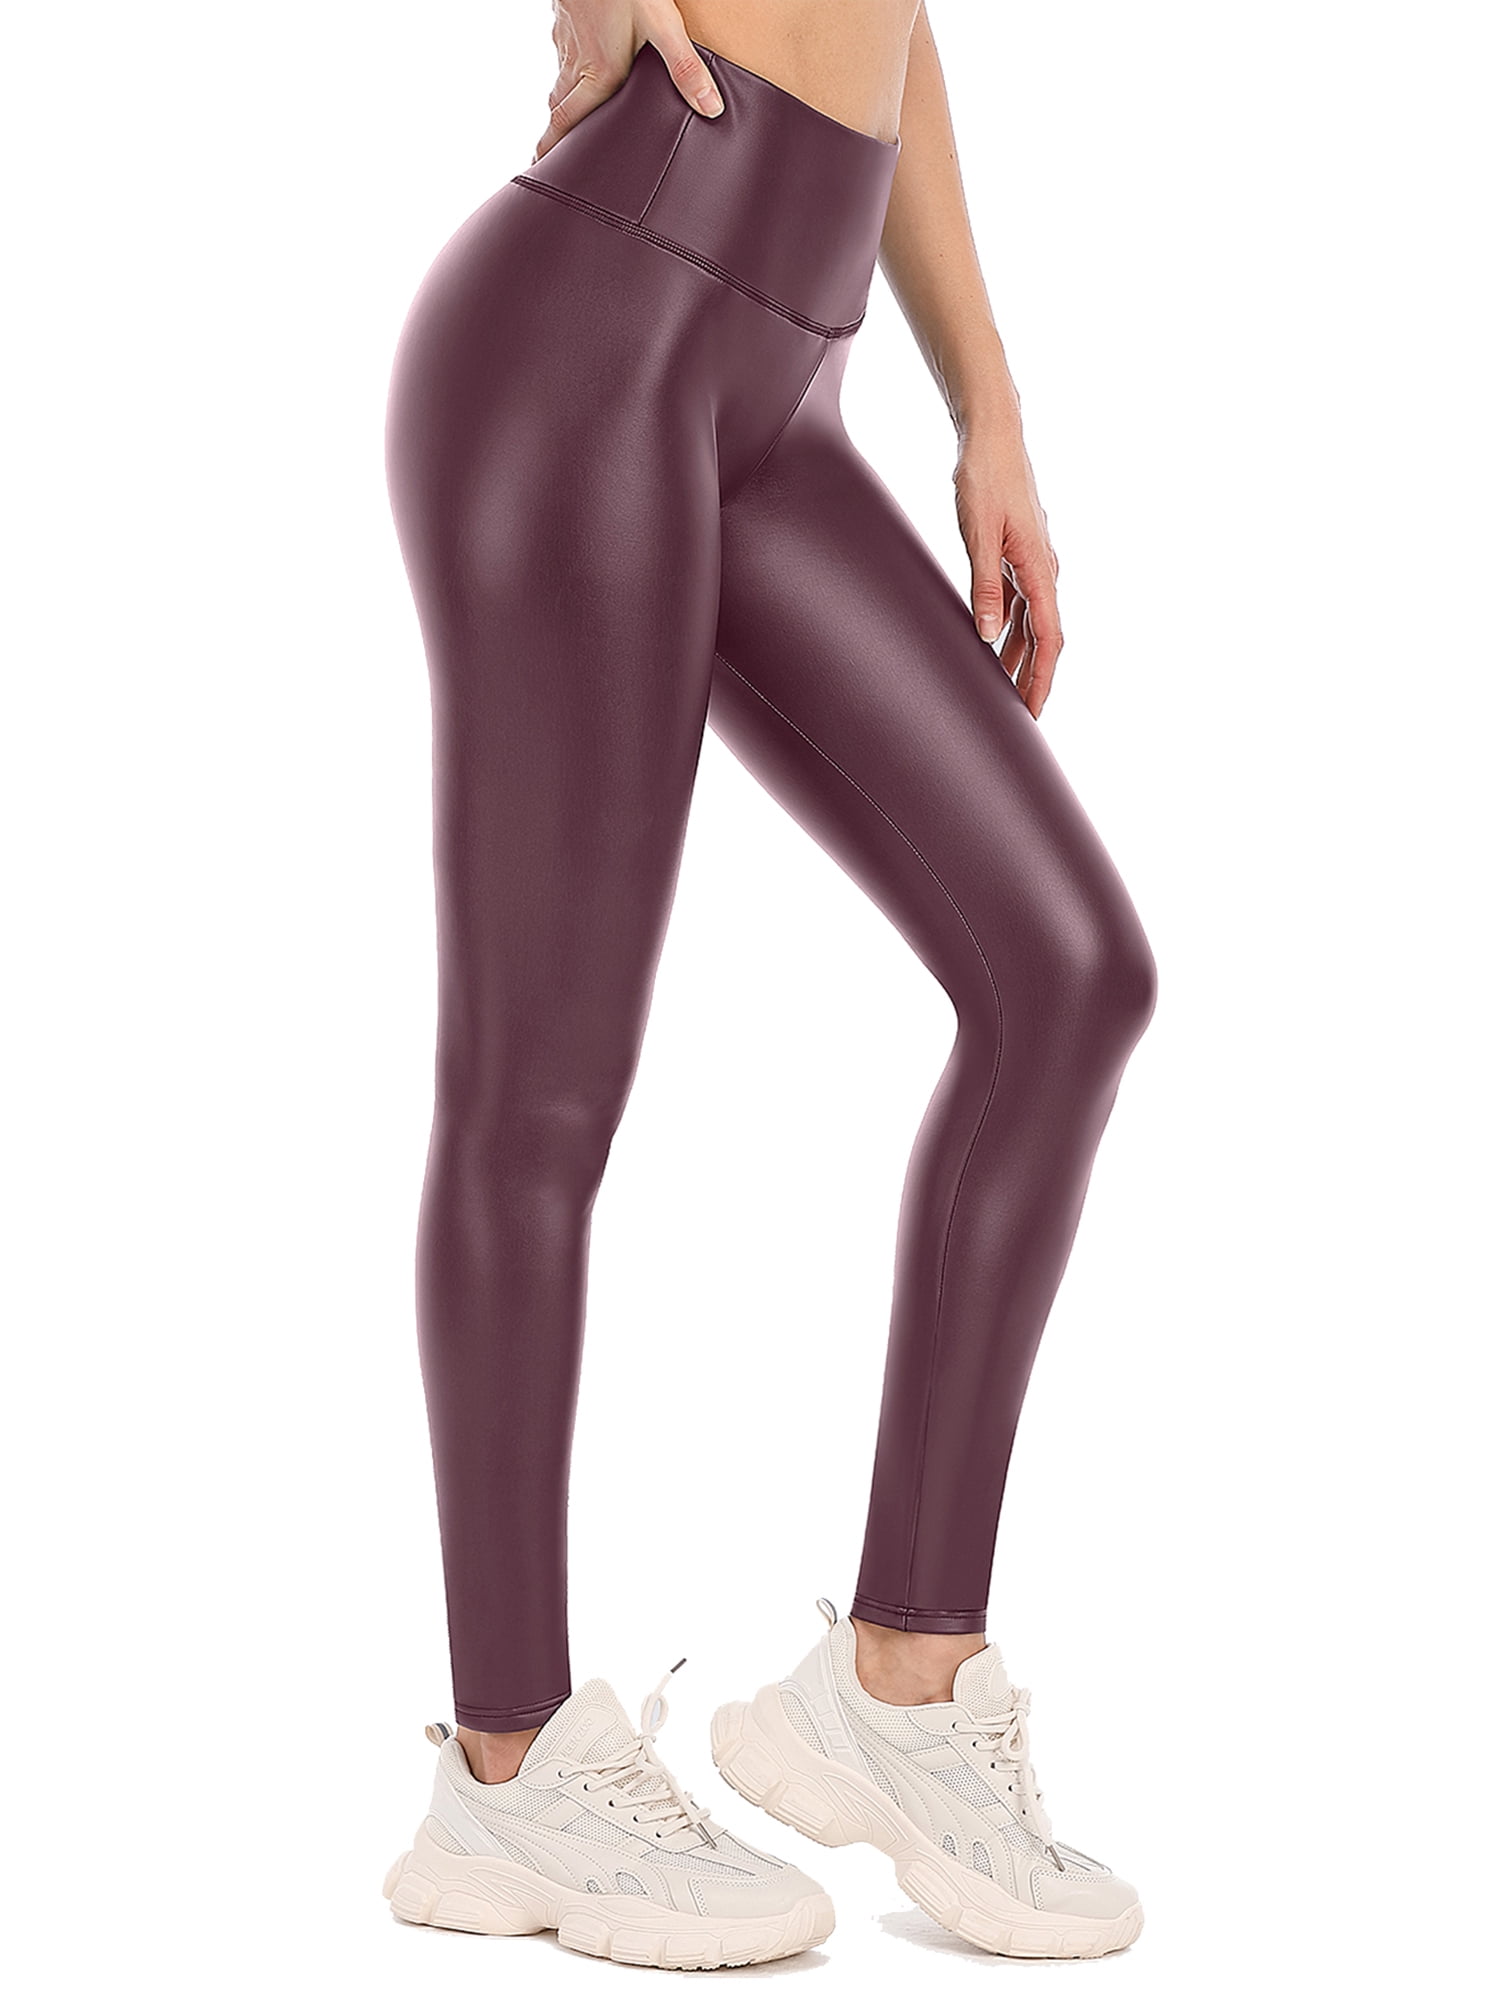 Women's Faux Leather Thermal Leggings Fleece Lined Warm Yoga Pants with  Pockets 